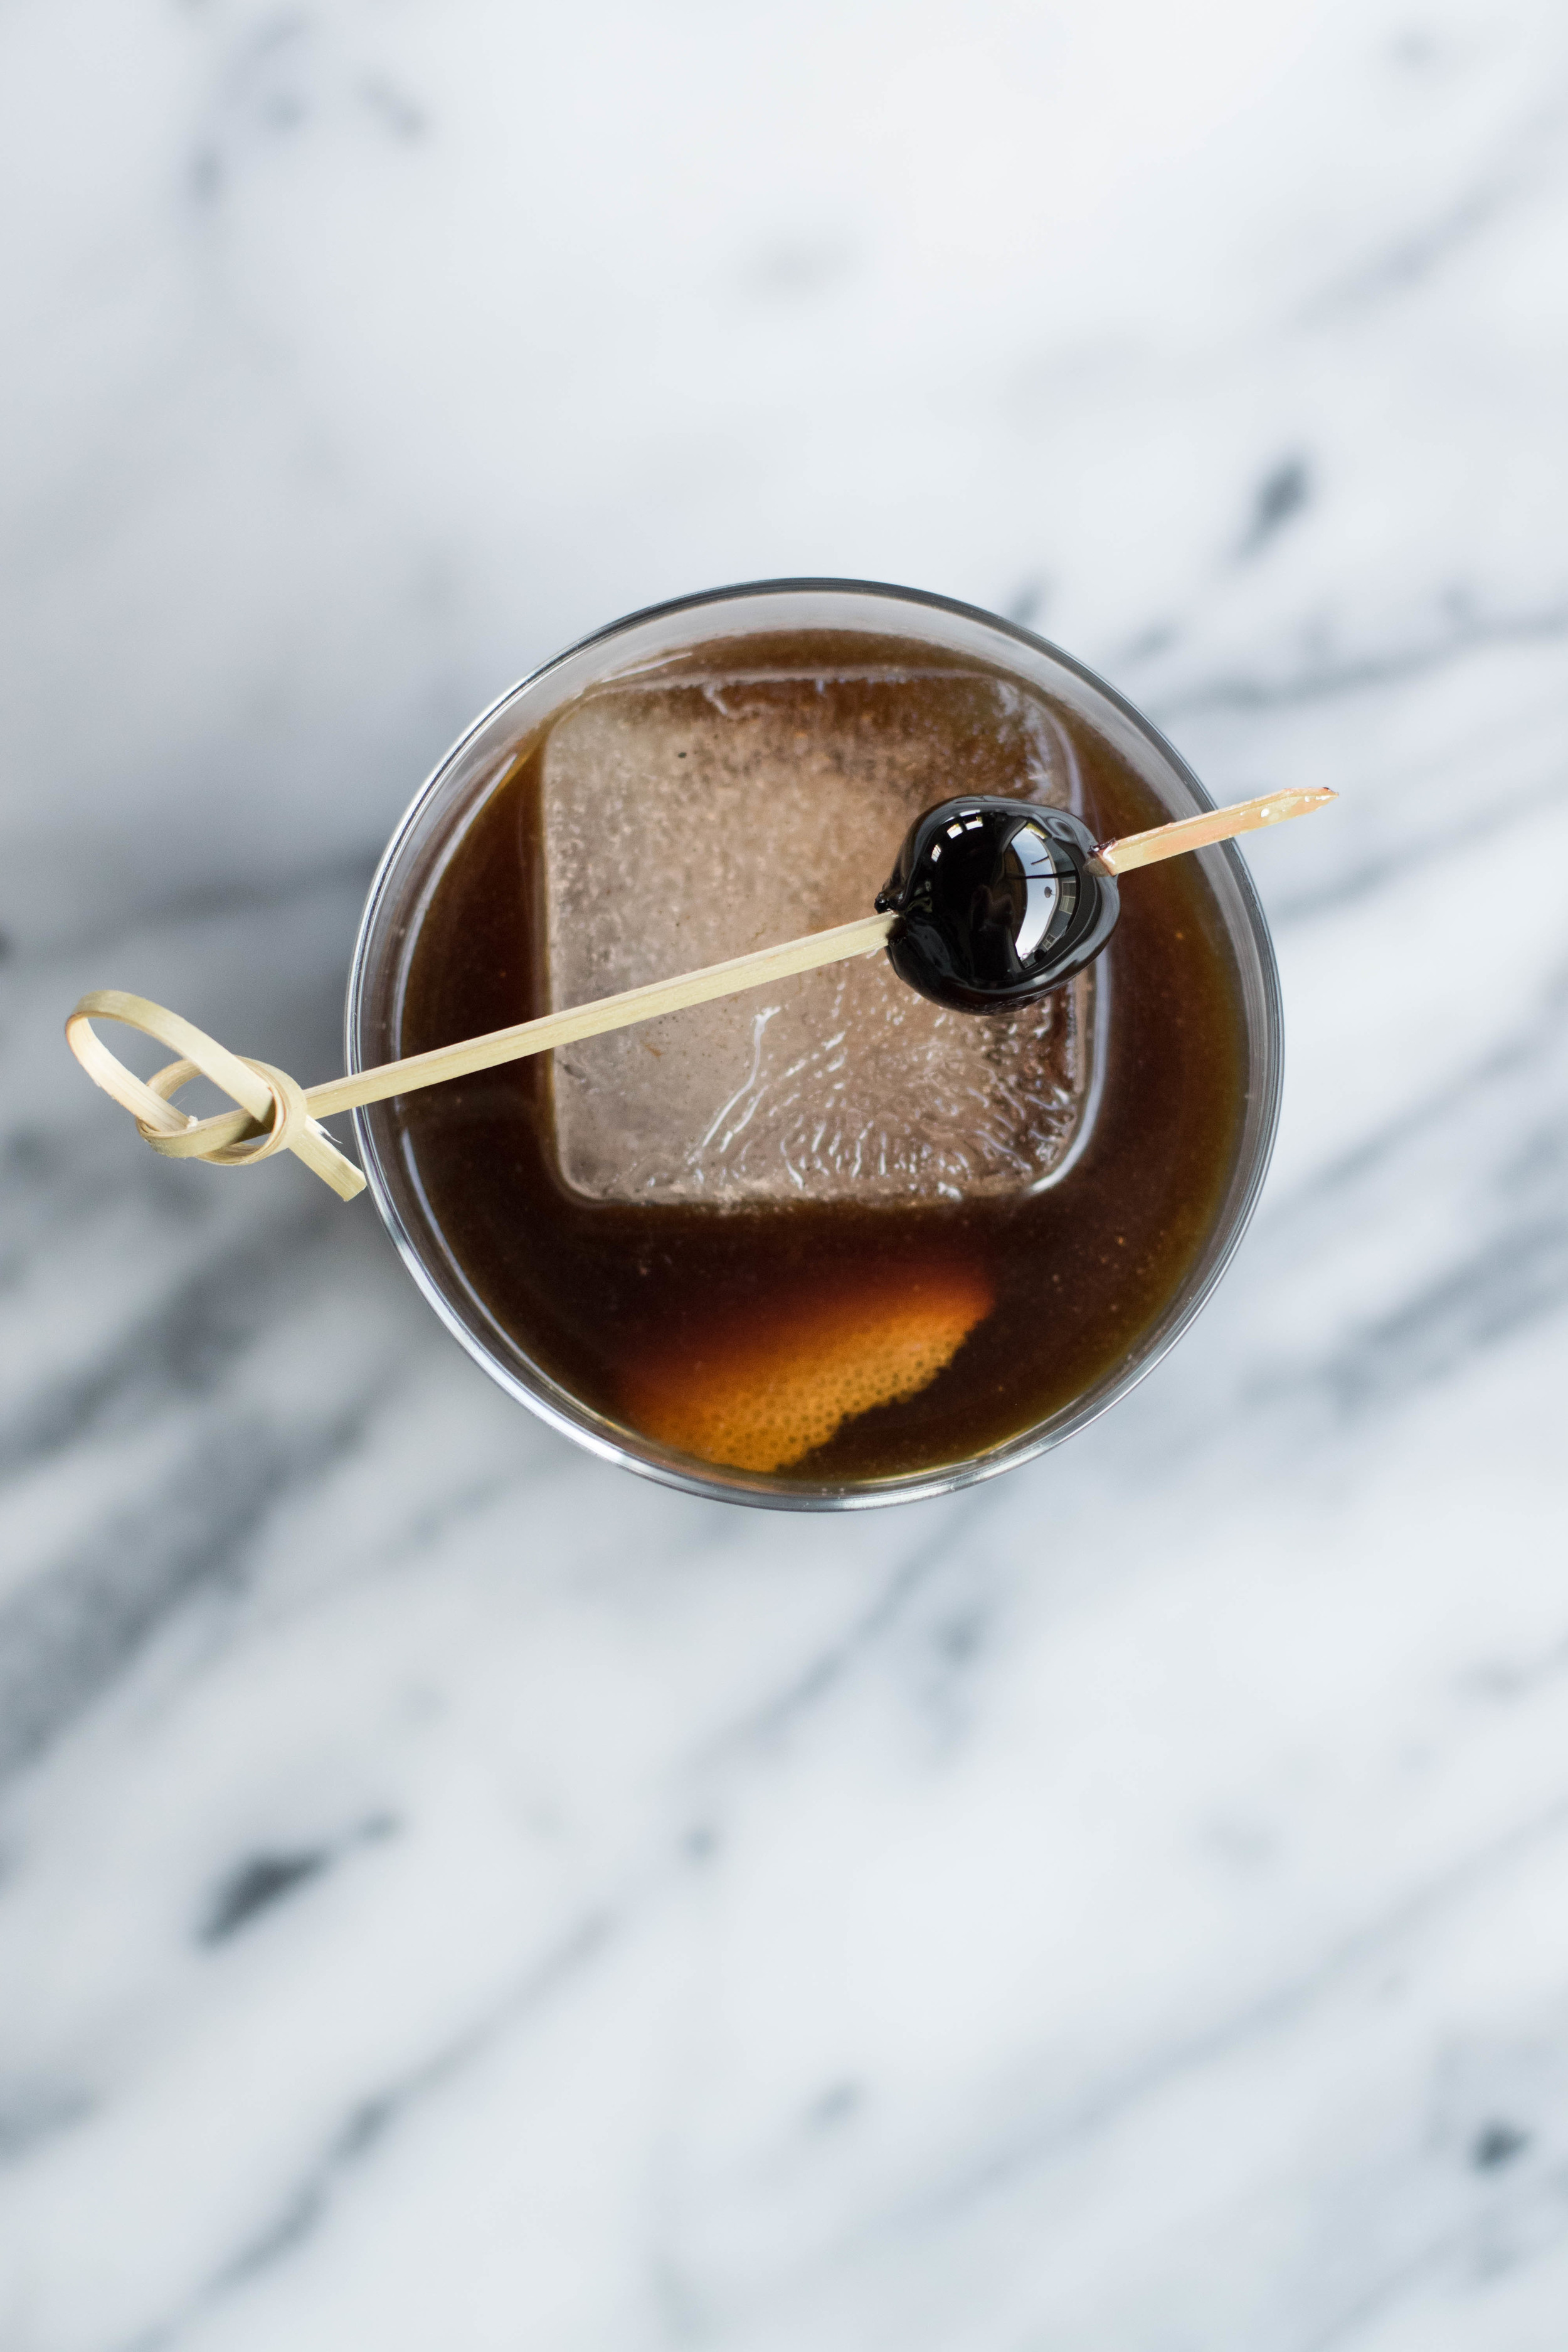 https://images.squarespace-cdn.com/content/v1/553d92dbe4b0955fe53b9d78/1462933572224-1TF1X9TJC787ITVRCJIW/Cold+Brew+Old+Fashioned+%7C+All+Purpose+Flour+Child